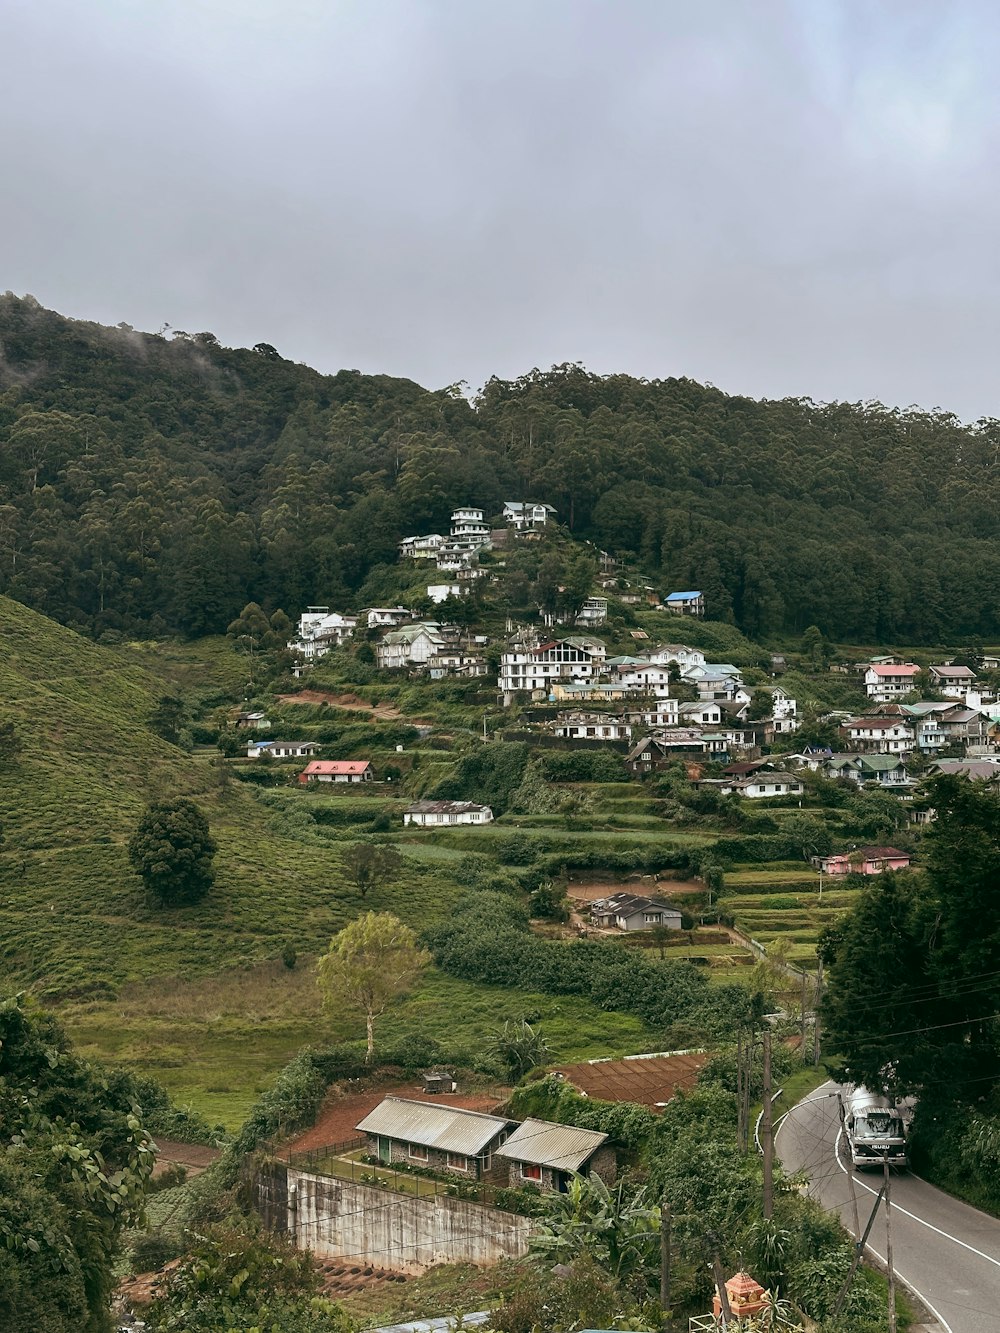 a view of a small town on a hill